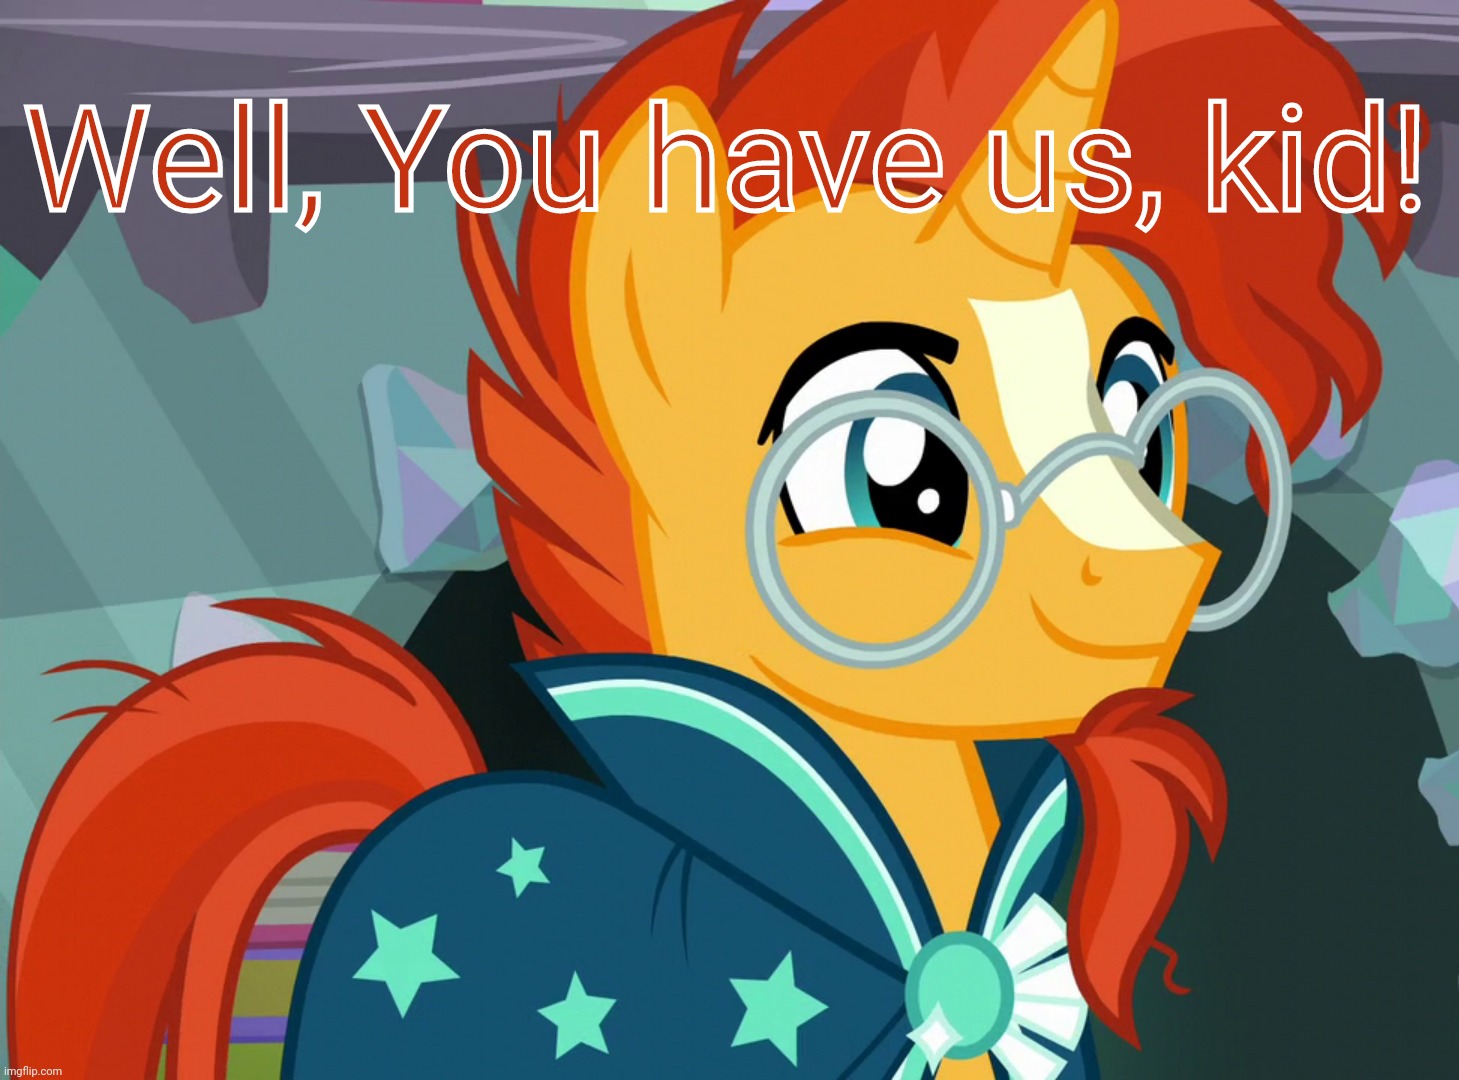 Happy Sunburst (MLP) | Well, You have us, kid! | image tagged in happy sunburst mlp | made w/ Imgflip meme maker